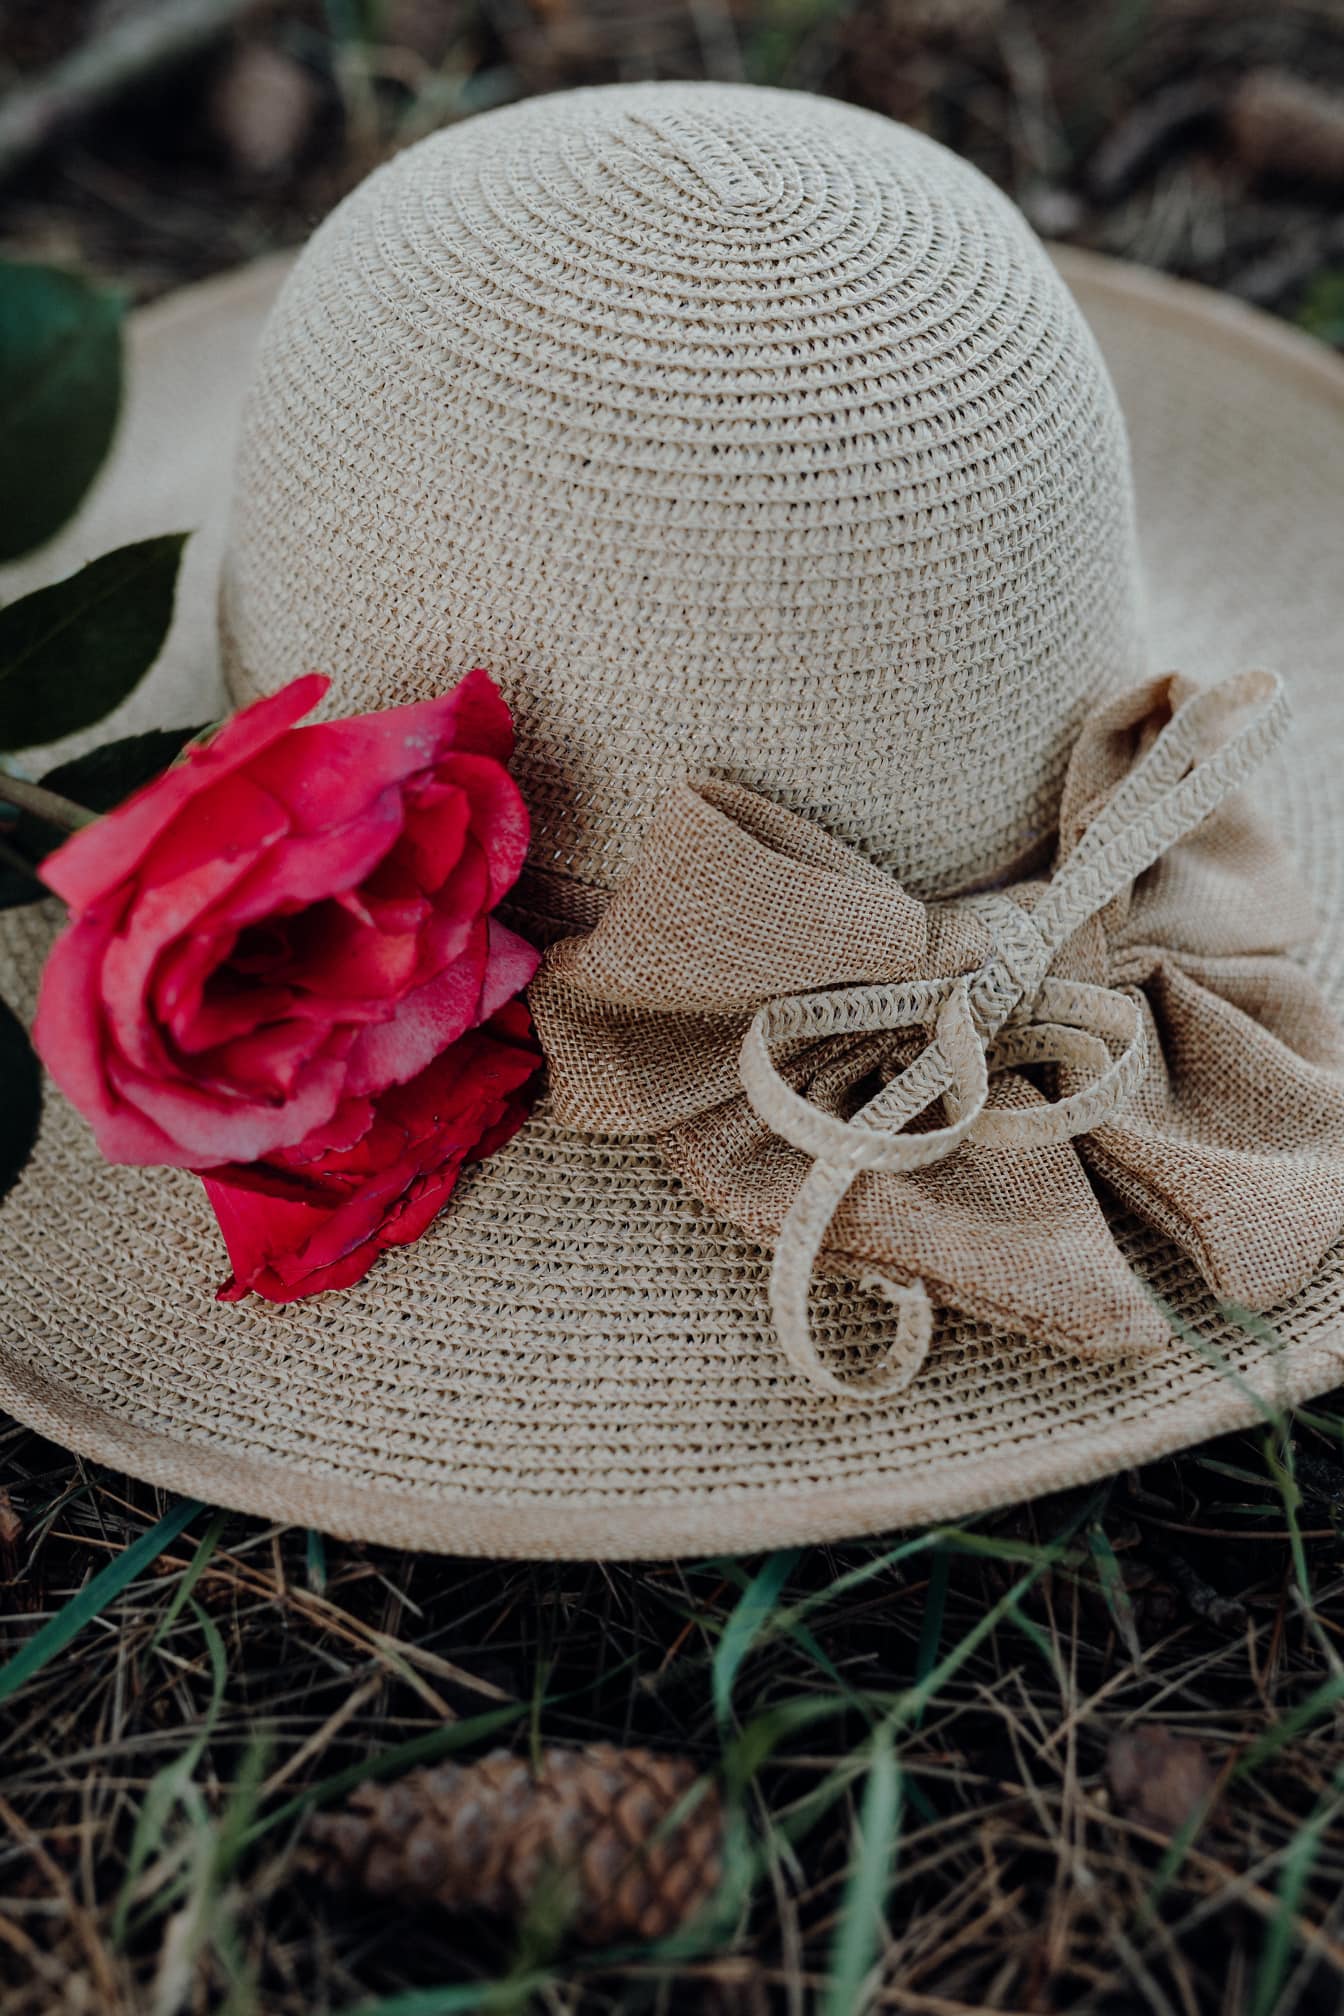 Fashionable handmade hat with a reddish rose on it